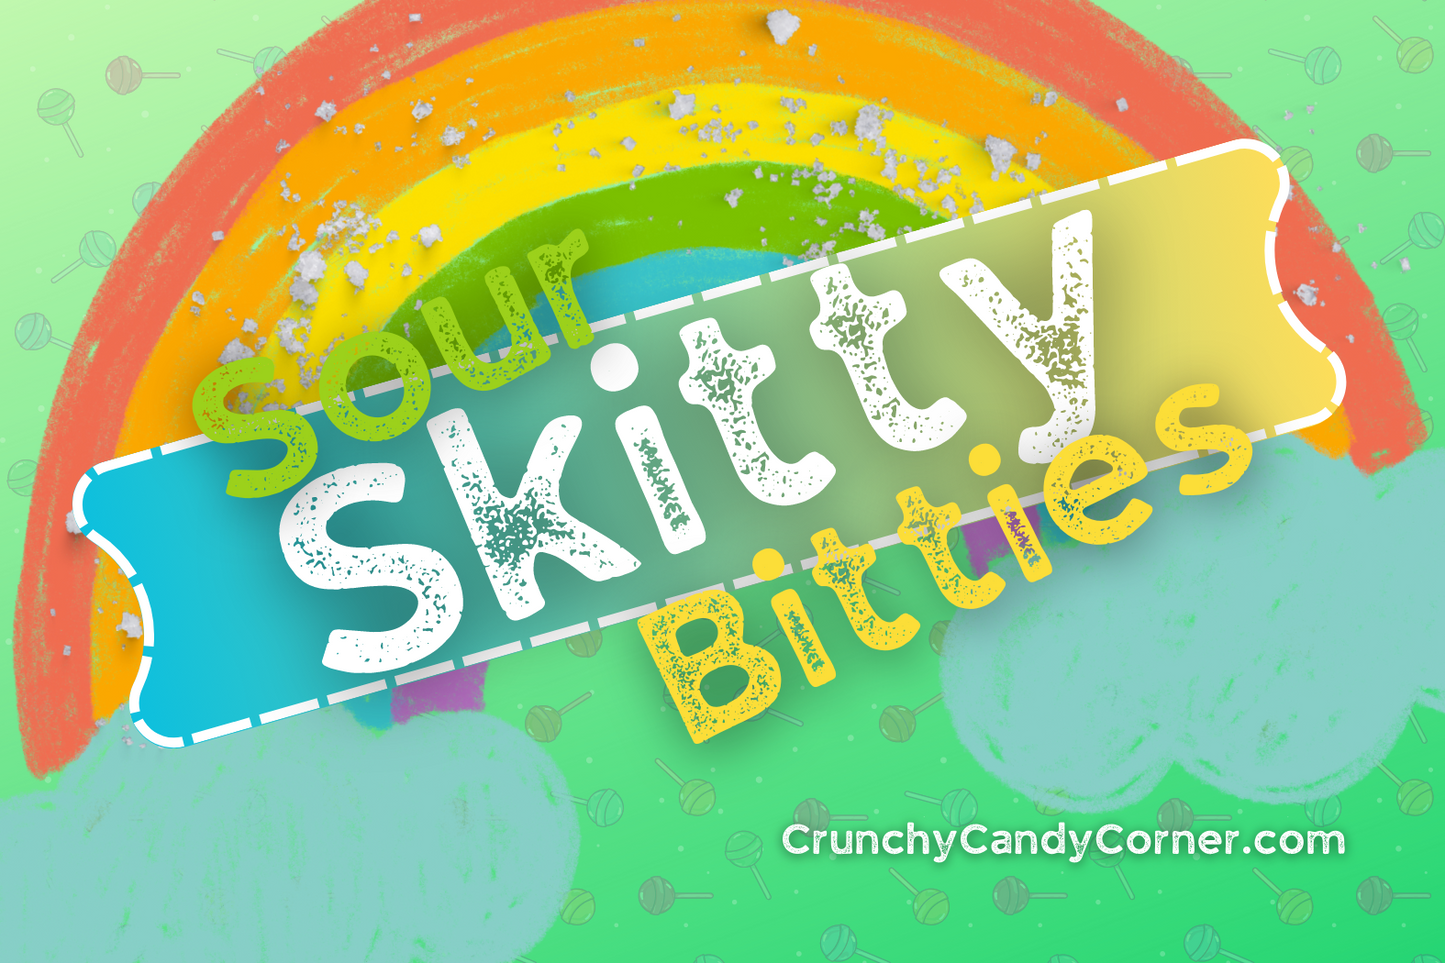 Sour Skitty Bitties Freeze Dried Candy! 5X8in Bag